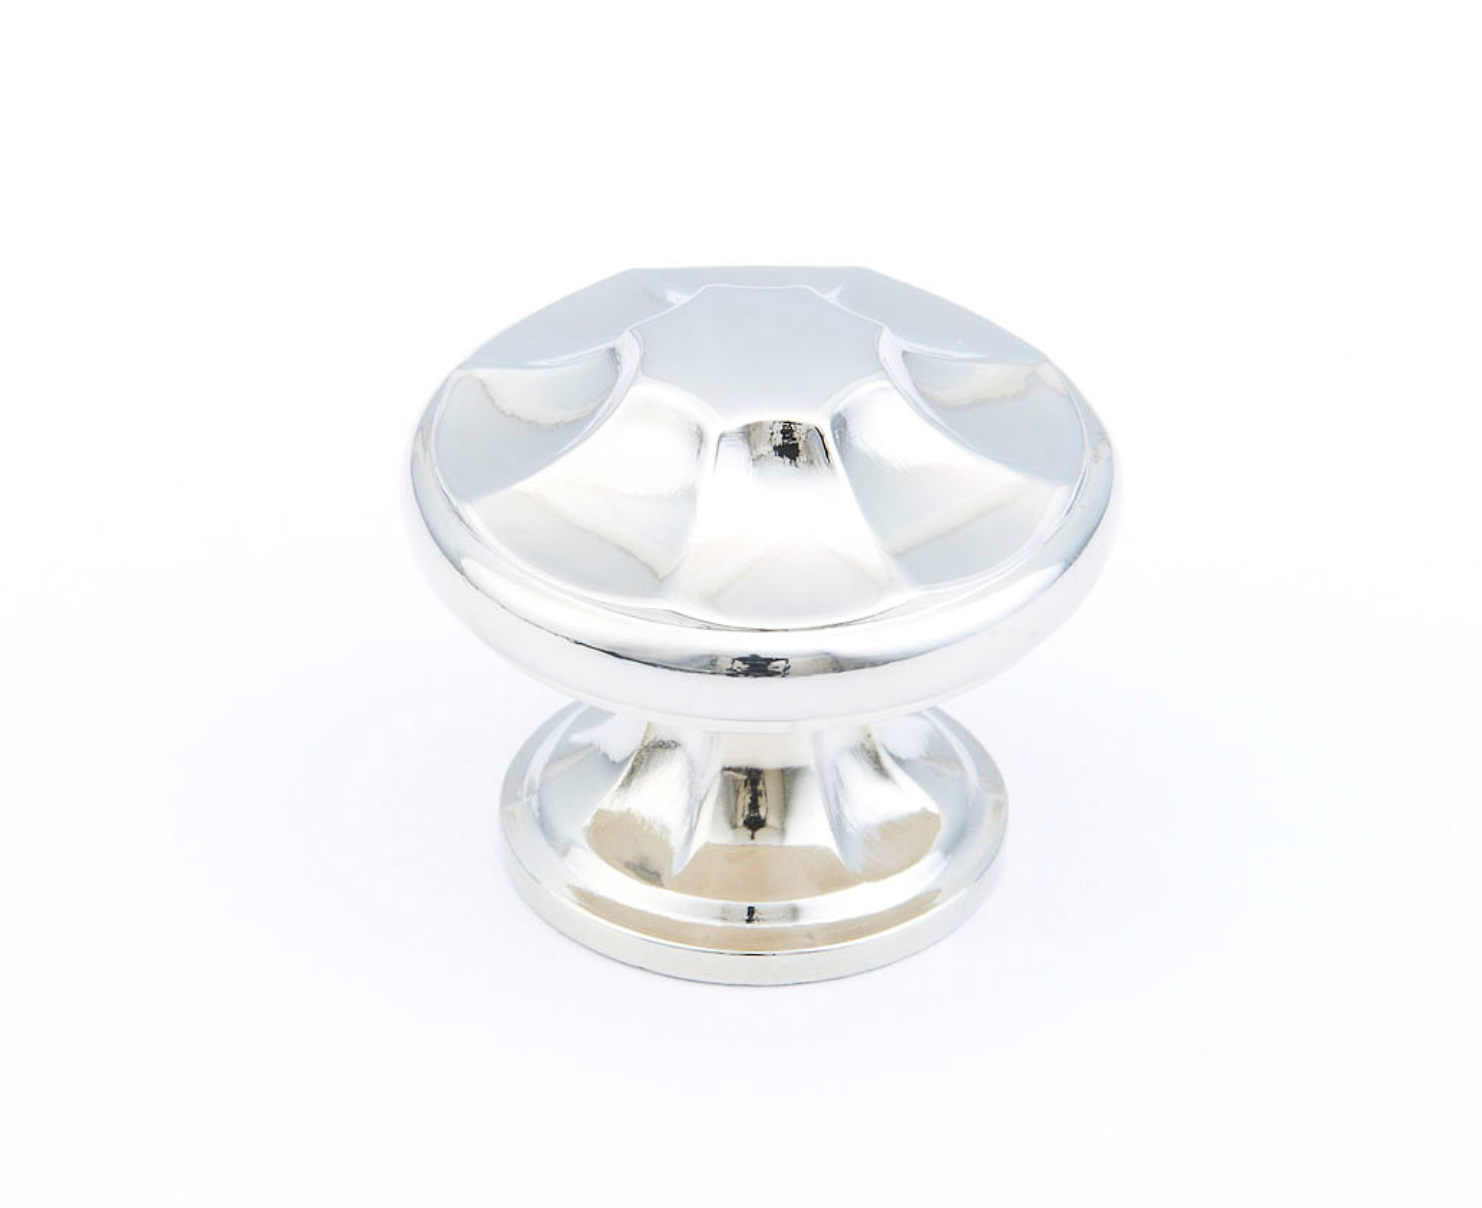 Polished Nickel "Regal" Cabinet Knobs and Drawer Pulls - Industry Hardware